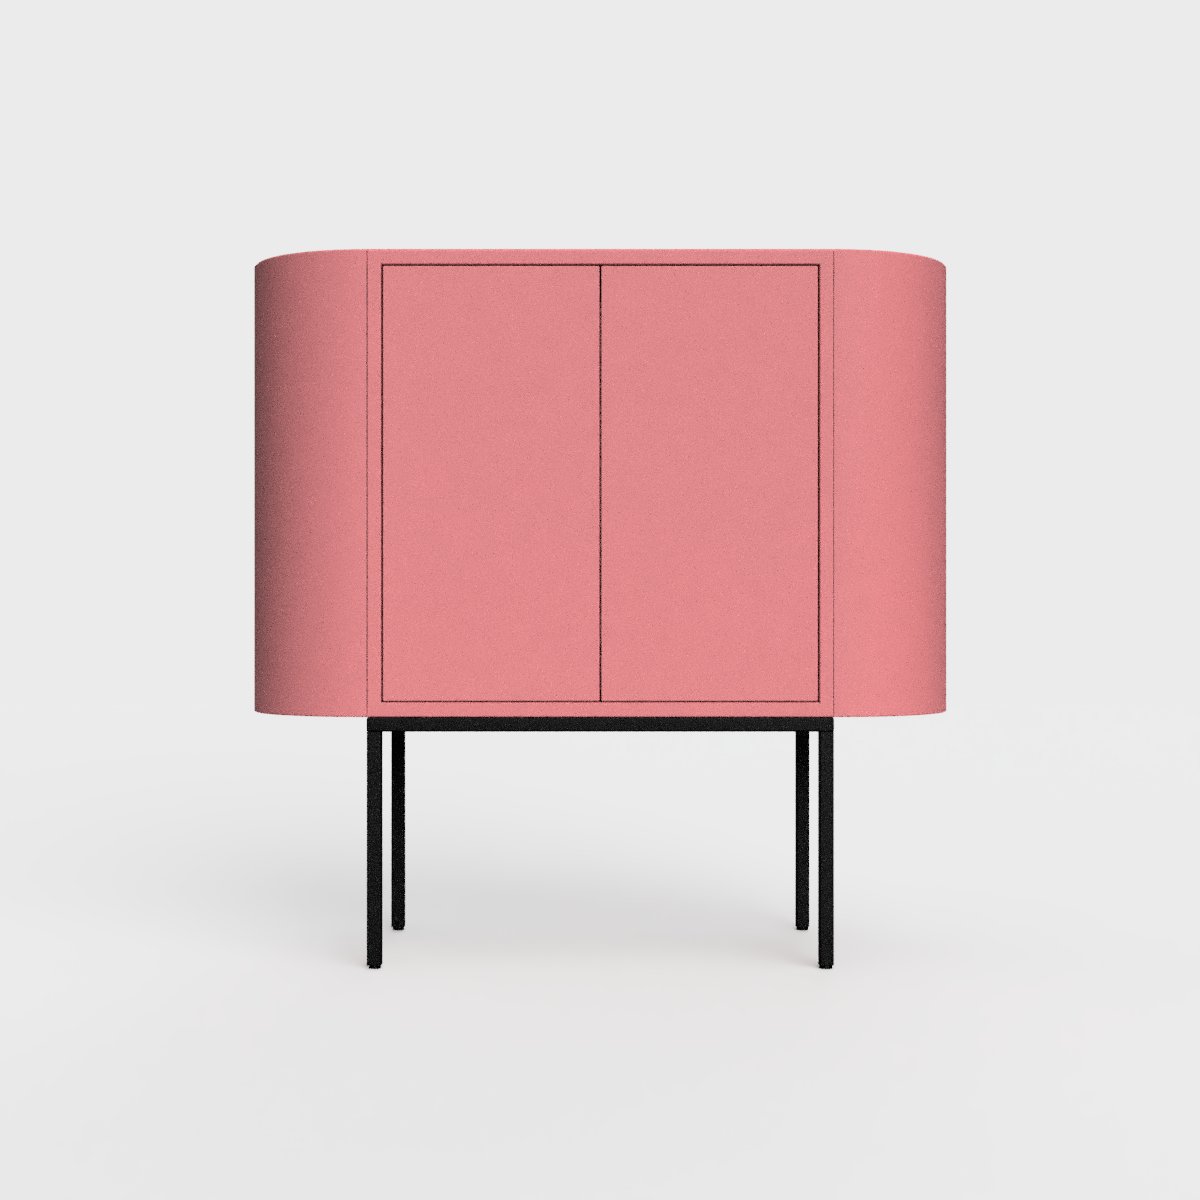 Siena 01 Sideboard in rose color, powder-coated steel, elegant and modern piece of furniture for your living room